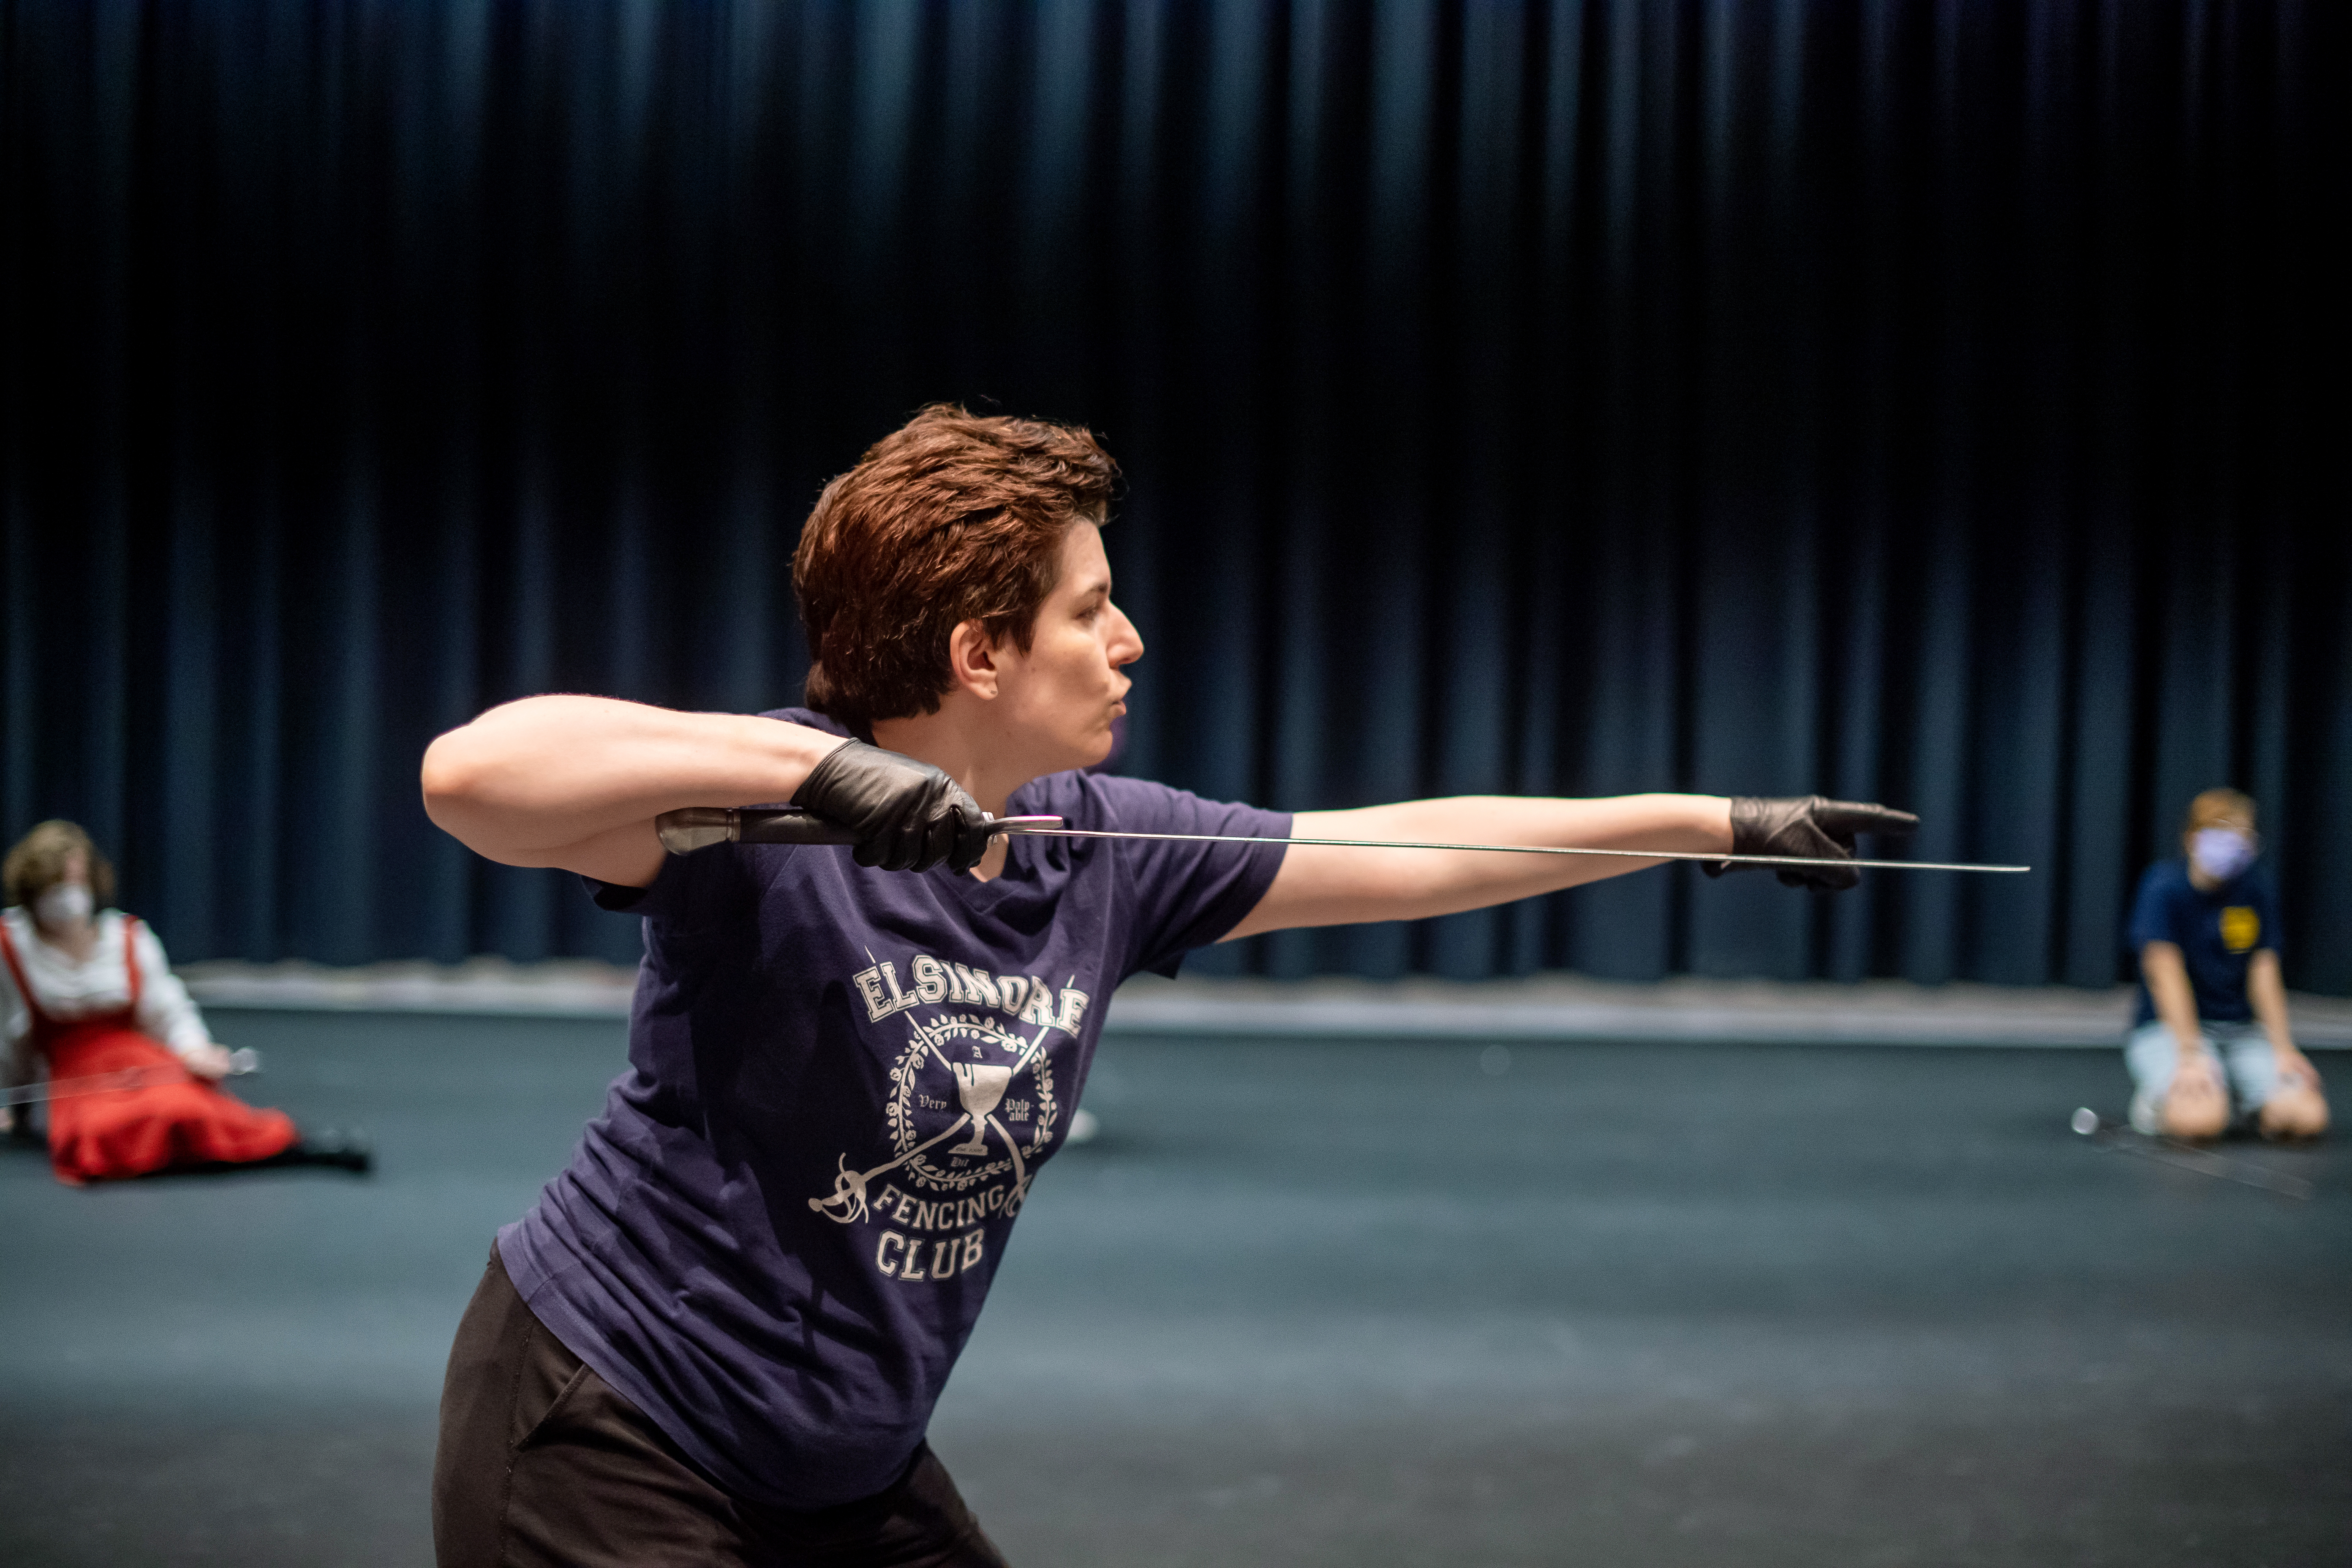 A stage combat instructor demonstrates a swordfight routine to Institute For The Arts students to learn.